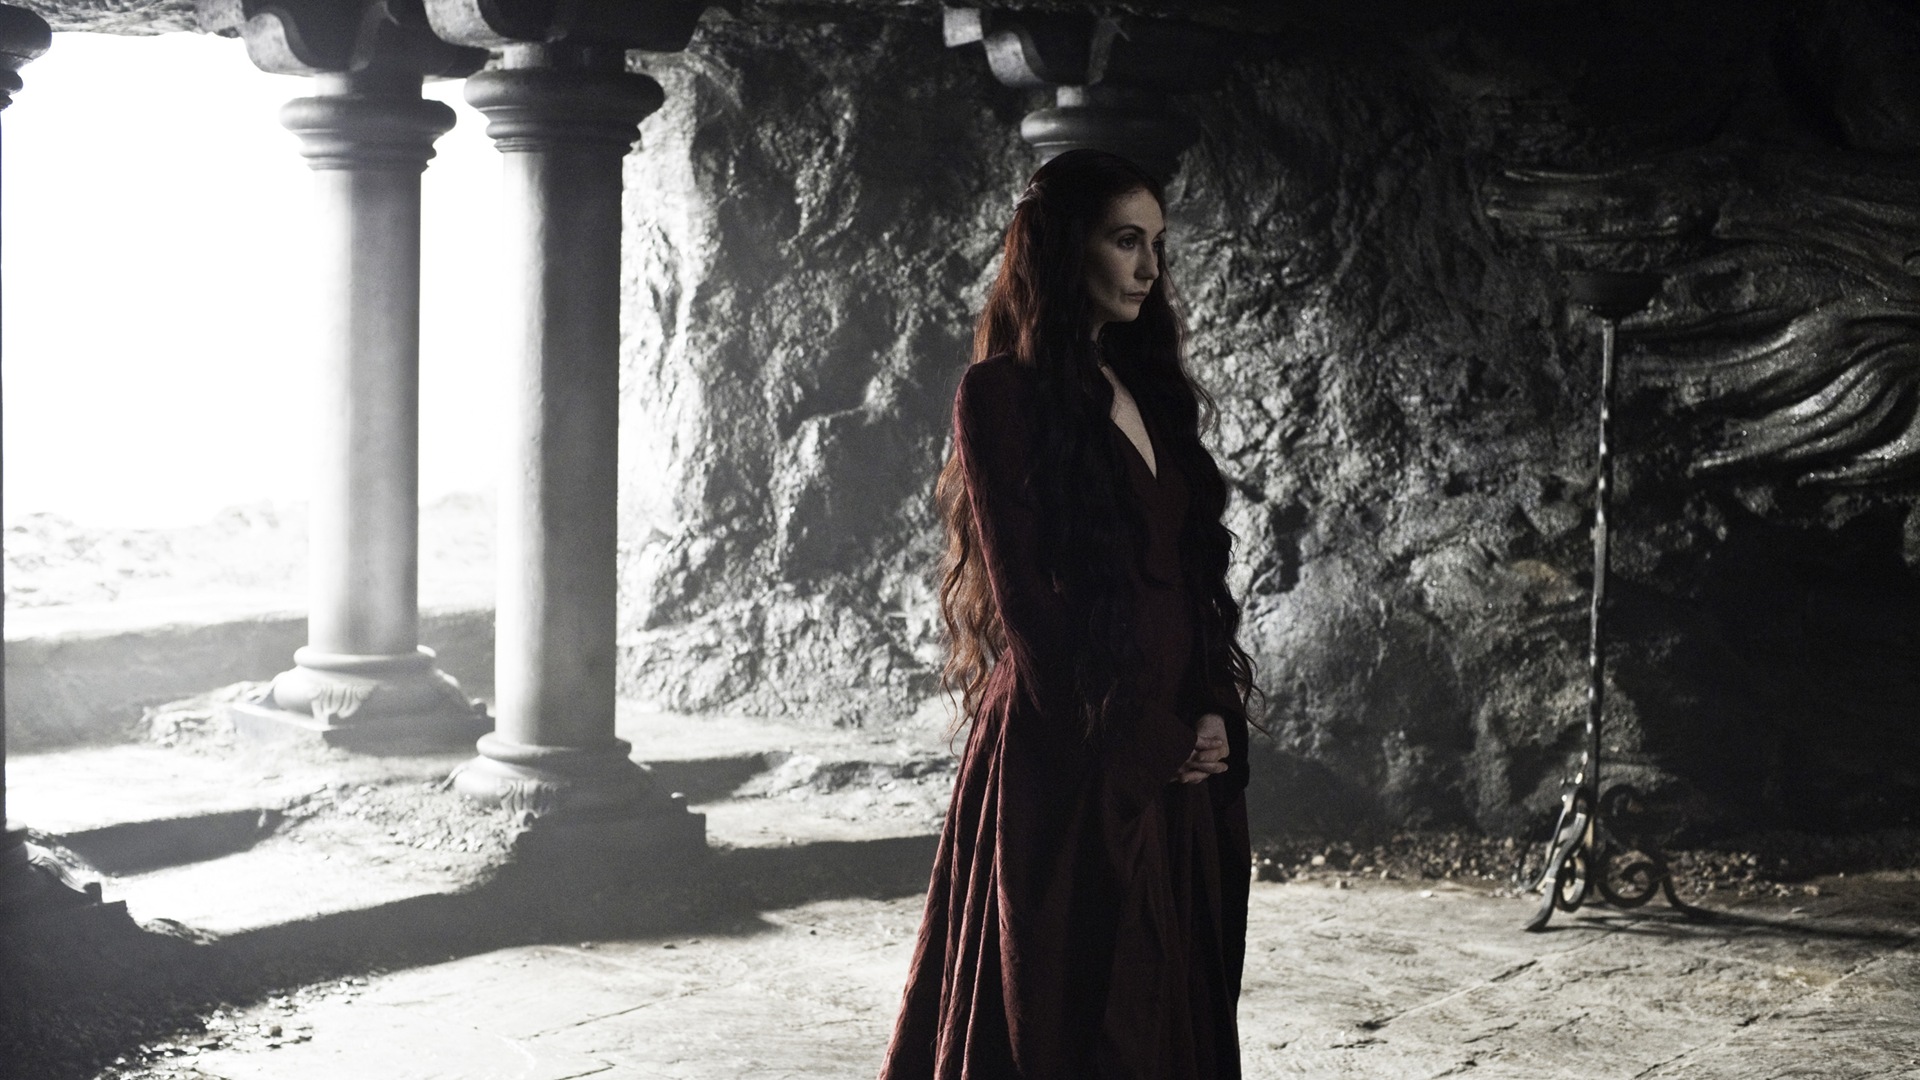 A Song of Ice and Fire: Game of Thrones fonds d'écran HD #34 - 1920x1080